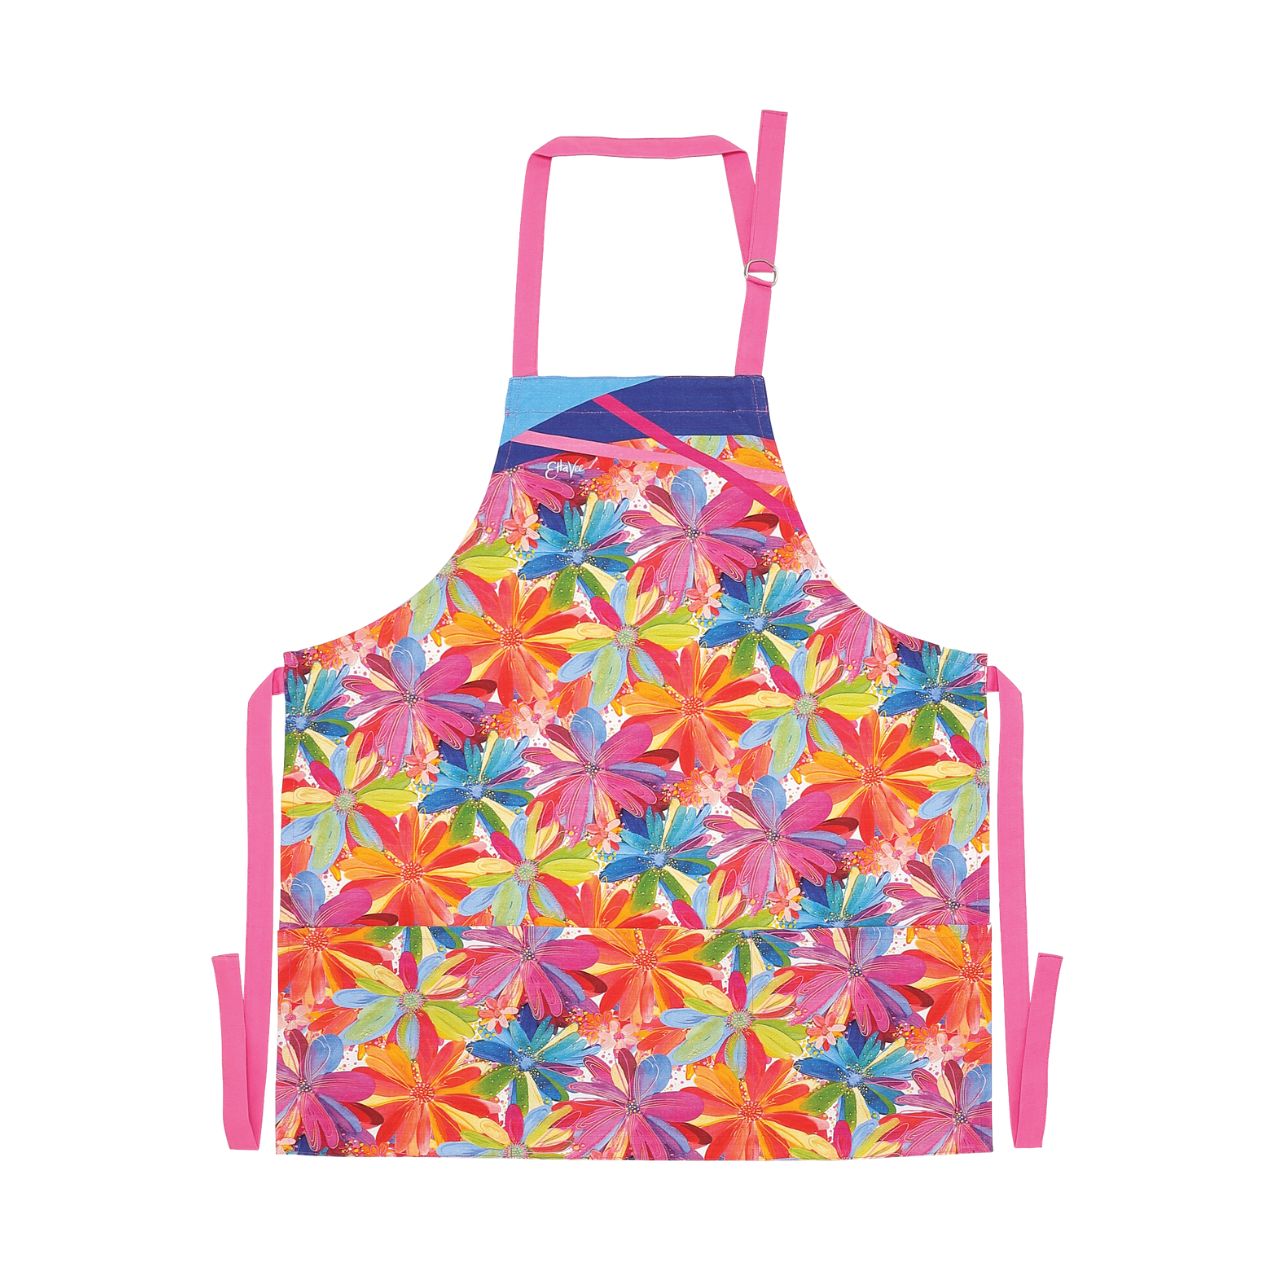 Jessi Raulet Jessi's Garden Bib Apron by Etta Vee  Artist, designer and art influencer, Jessi Raulet, is known for her colourful and bold designs. Keep your chef's clothes tidy with aprons in vibrant patterns sure to make any kitchen lively. This makes a great gift for those who enjoy their time in the kitchen.